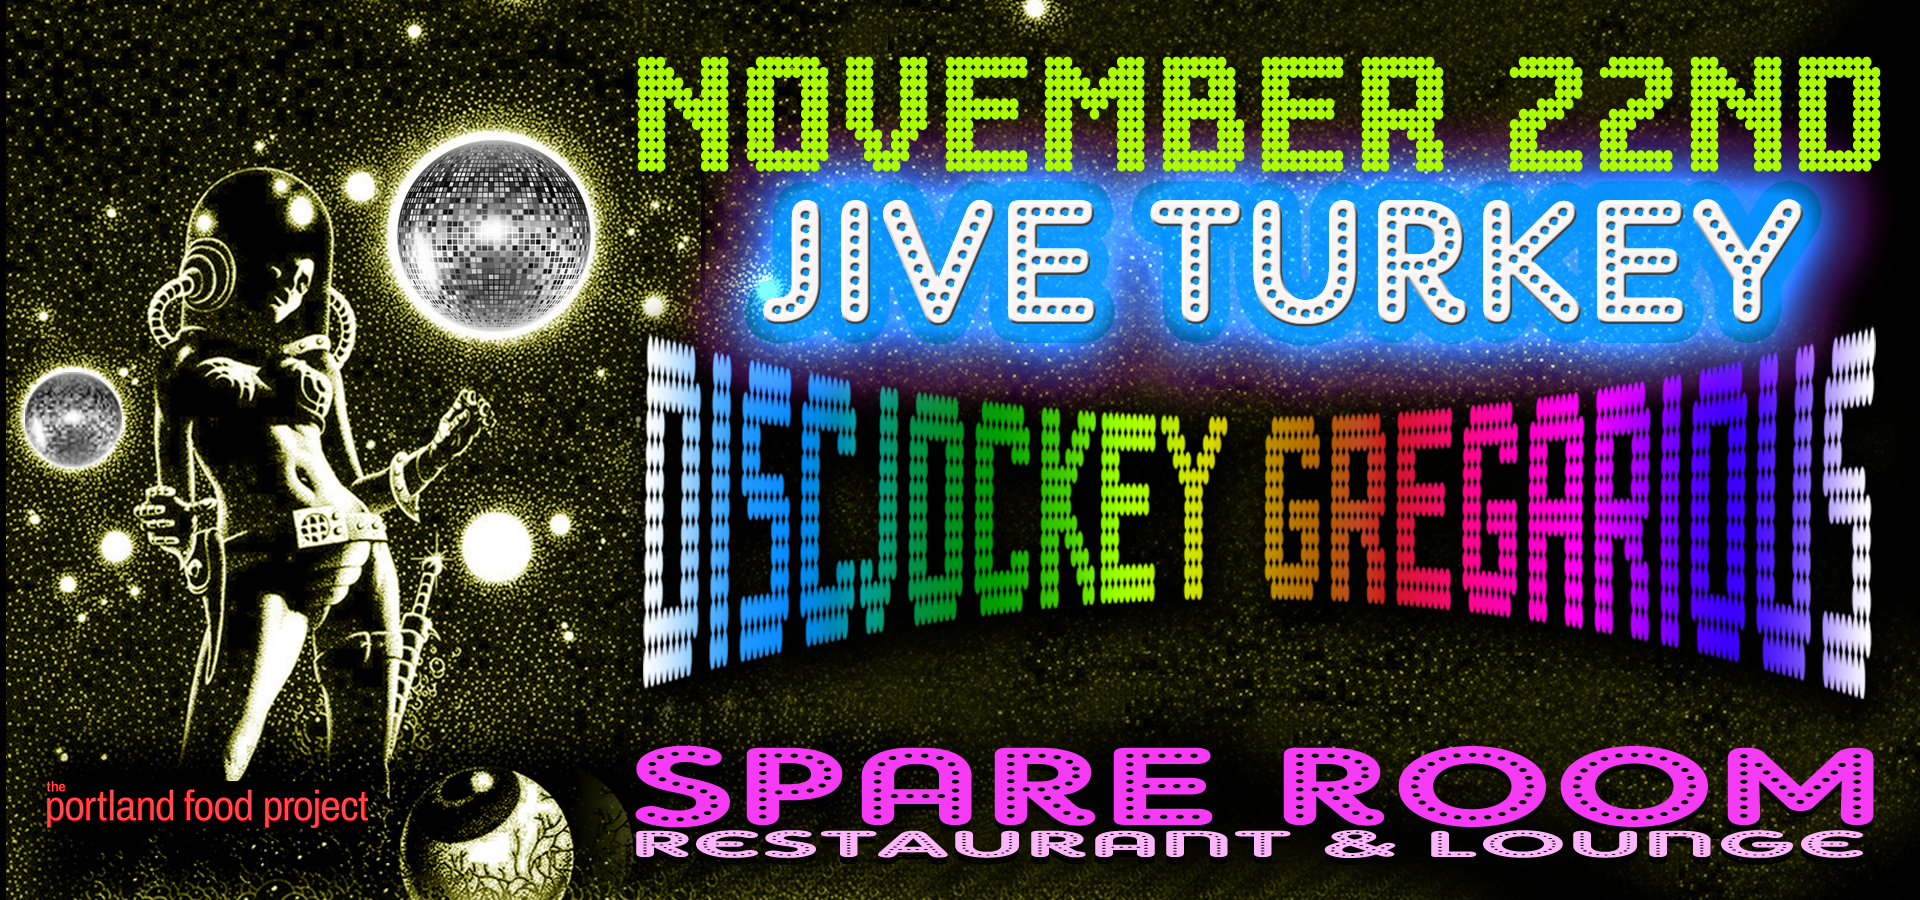 Jive Turkey Disco Dance Party Tickets Spare Room Restaurant Lounge Portland Or Wed Nov 22 2017 At 9pm Mercury Tickets